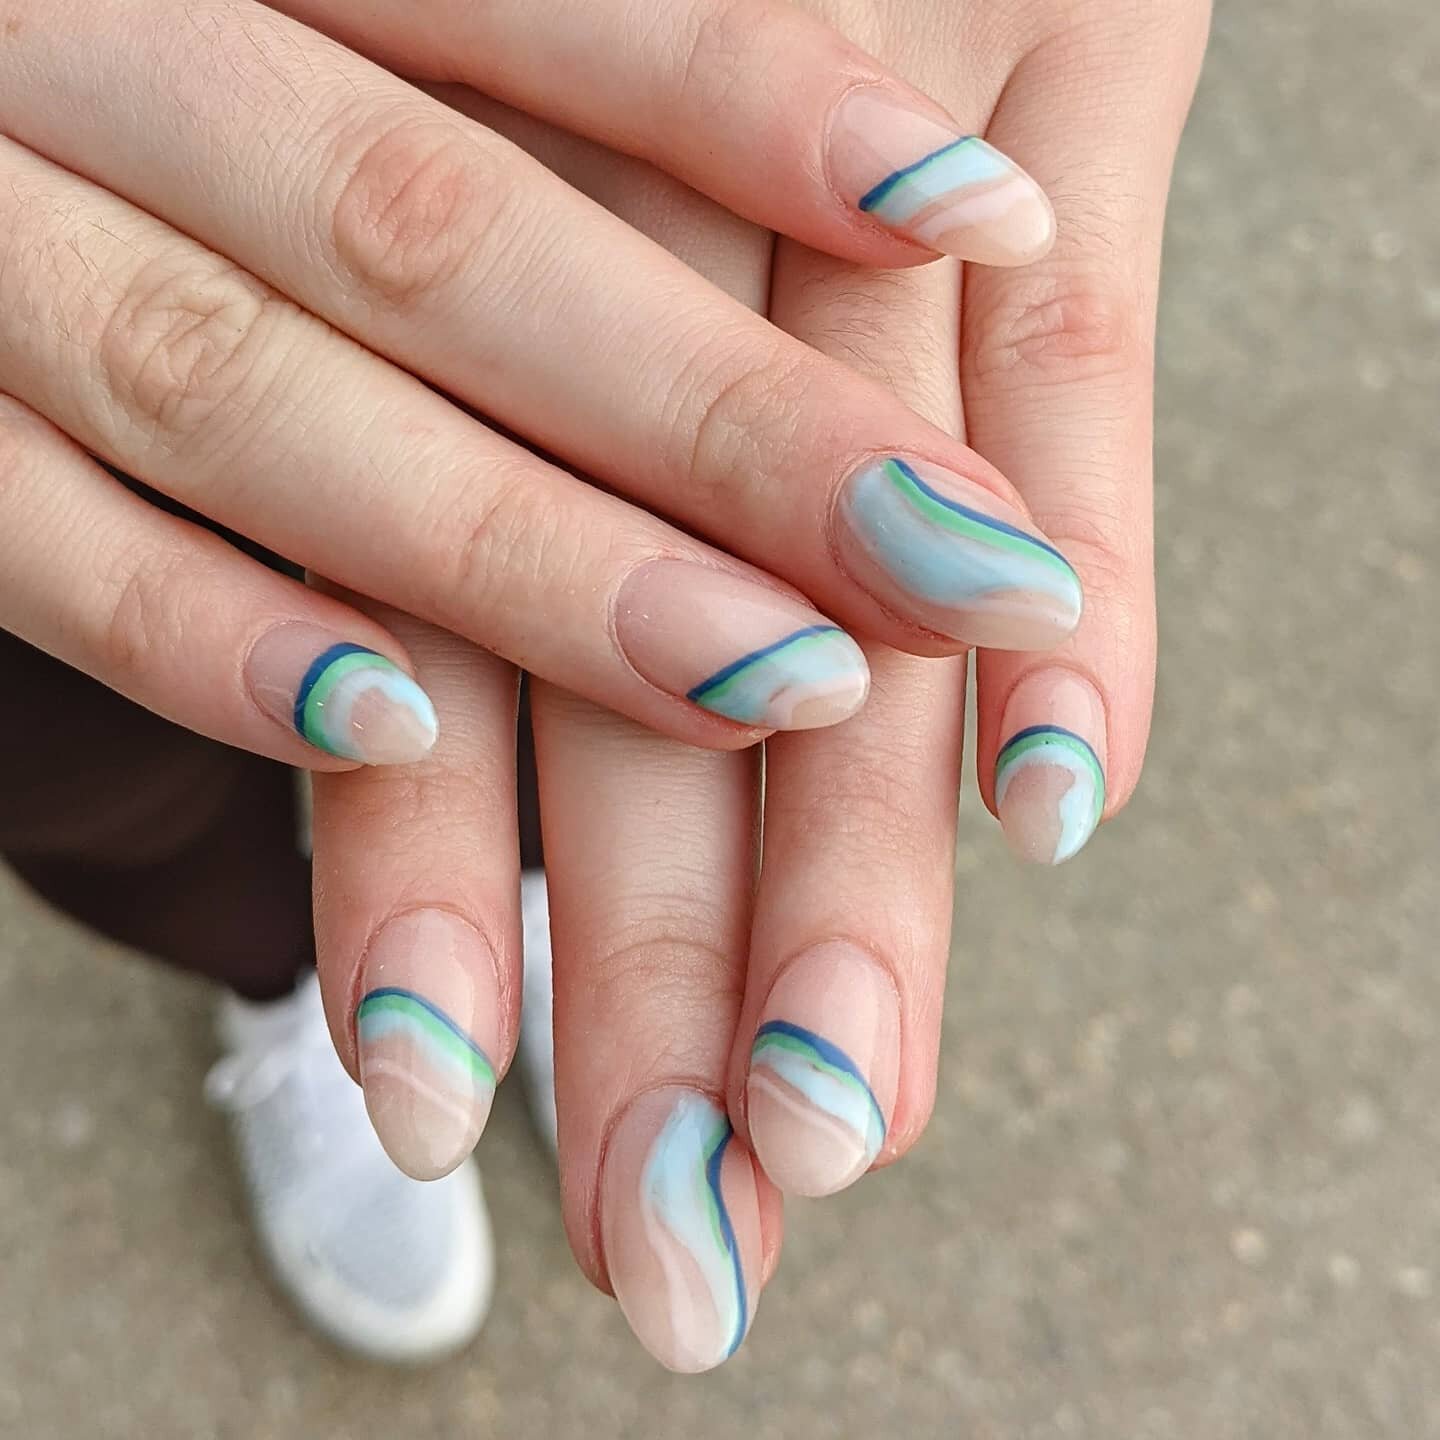 A B S T R A C T S 🌊💚
.
Abstracts are clearly trending this year... What are your favorites? Color or monochromes?
.
Please book for nail art when booking Appointments, If you are not sure who to book with please message us here 👍☺️
_______________